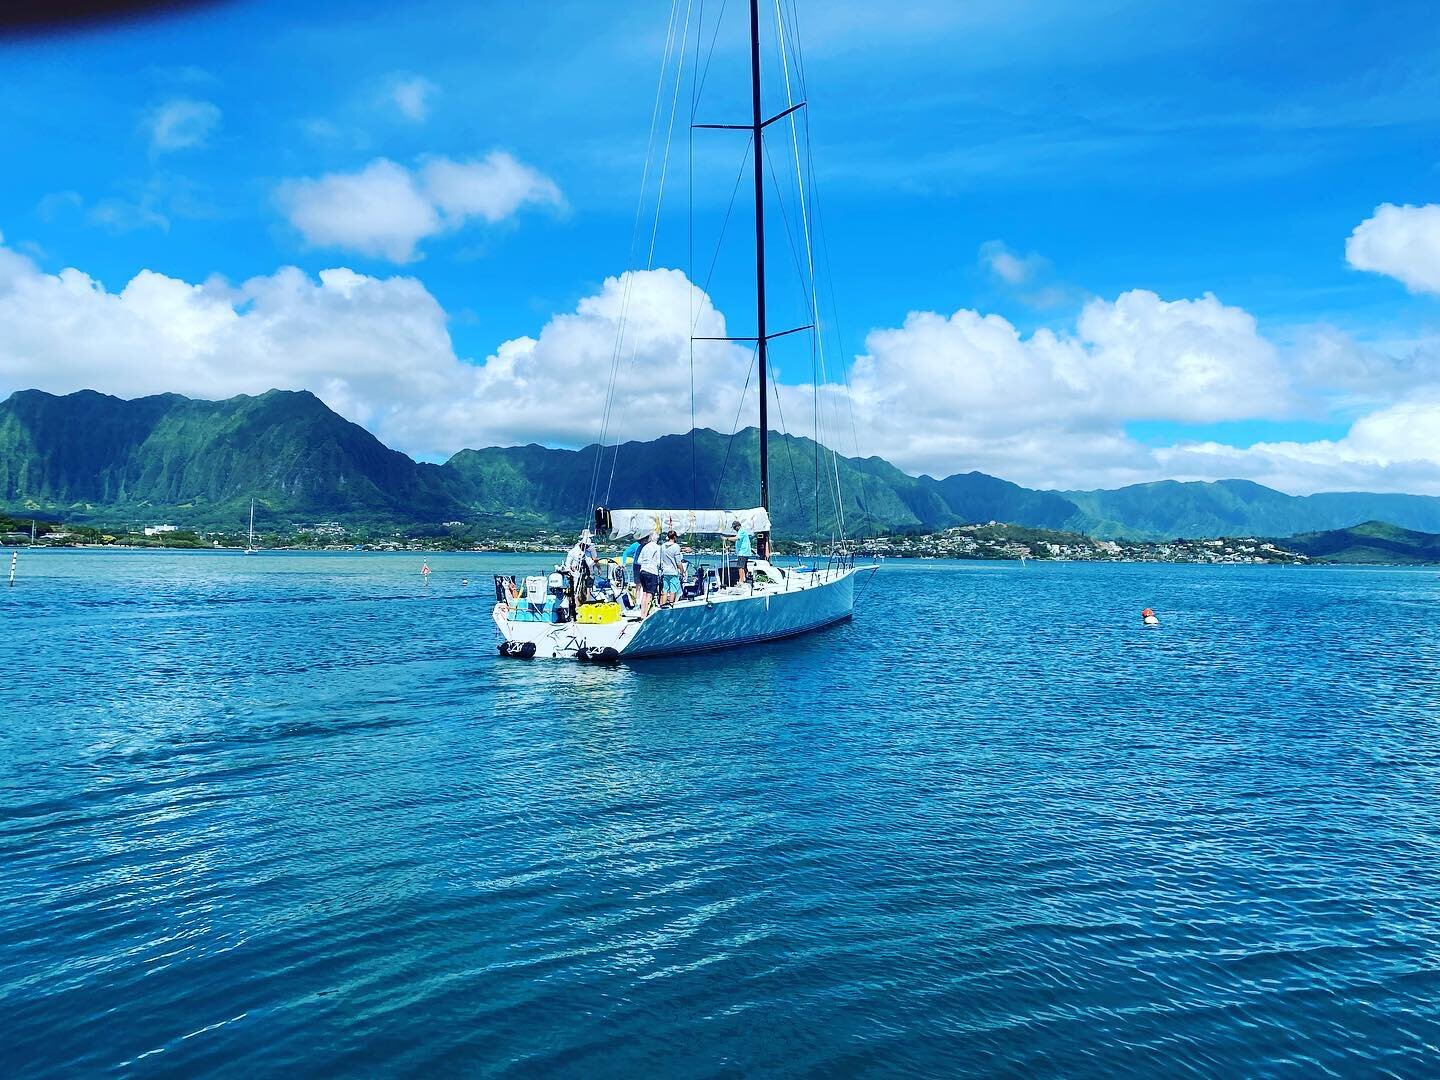 We&rsquo;re on our way out of Hawaiian waters. Typically lumpy first night. With occasional gusts in the 20s, we&rsquo;re still just using the main so the crew and boat can settle in. Later today, depending on some routing solutions, we&rsquo;ll add 